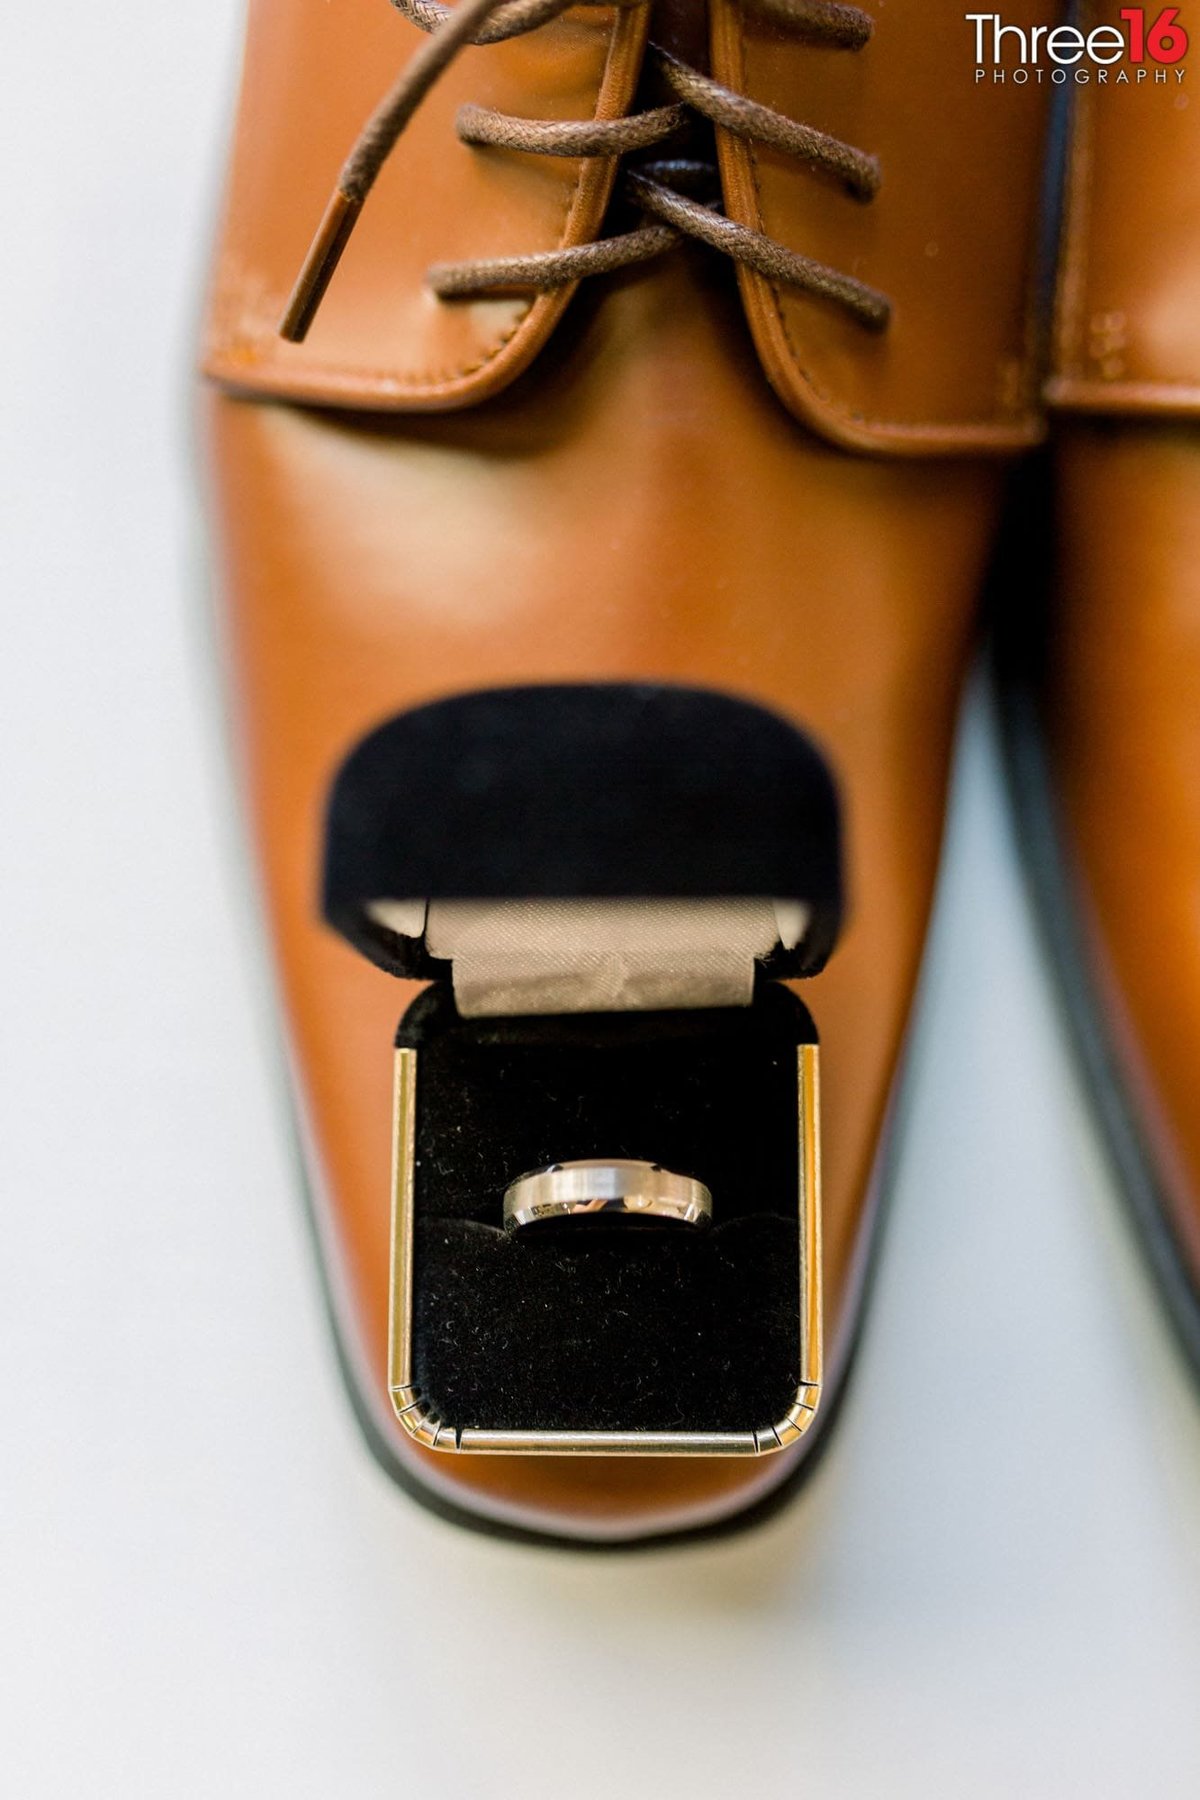 Groom's shoes and the wedding ring